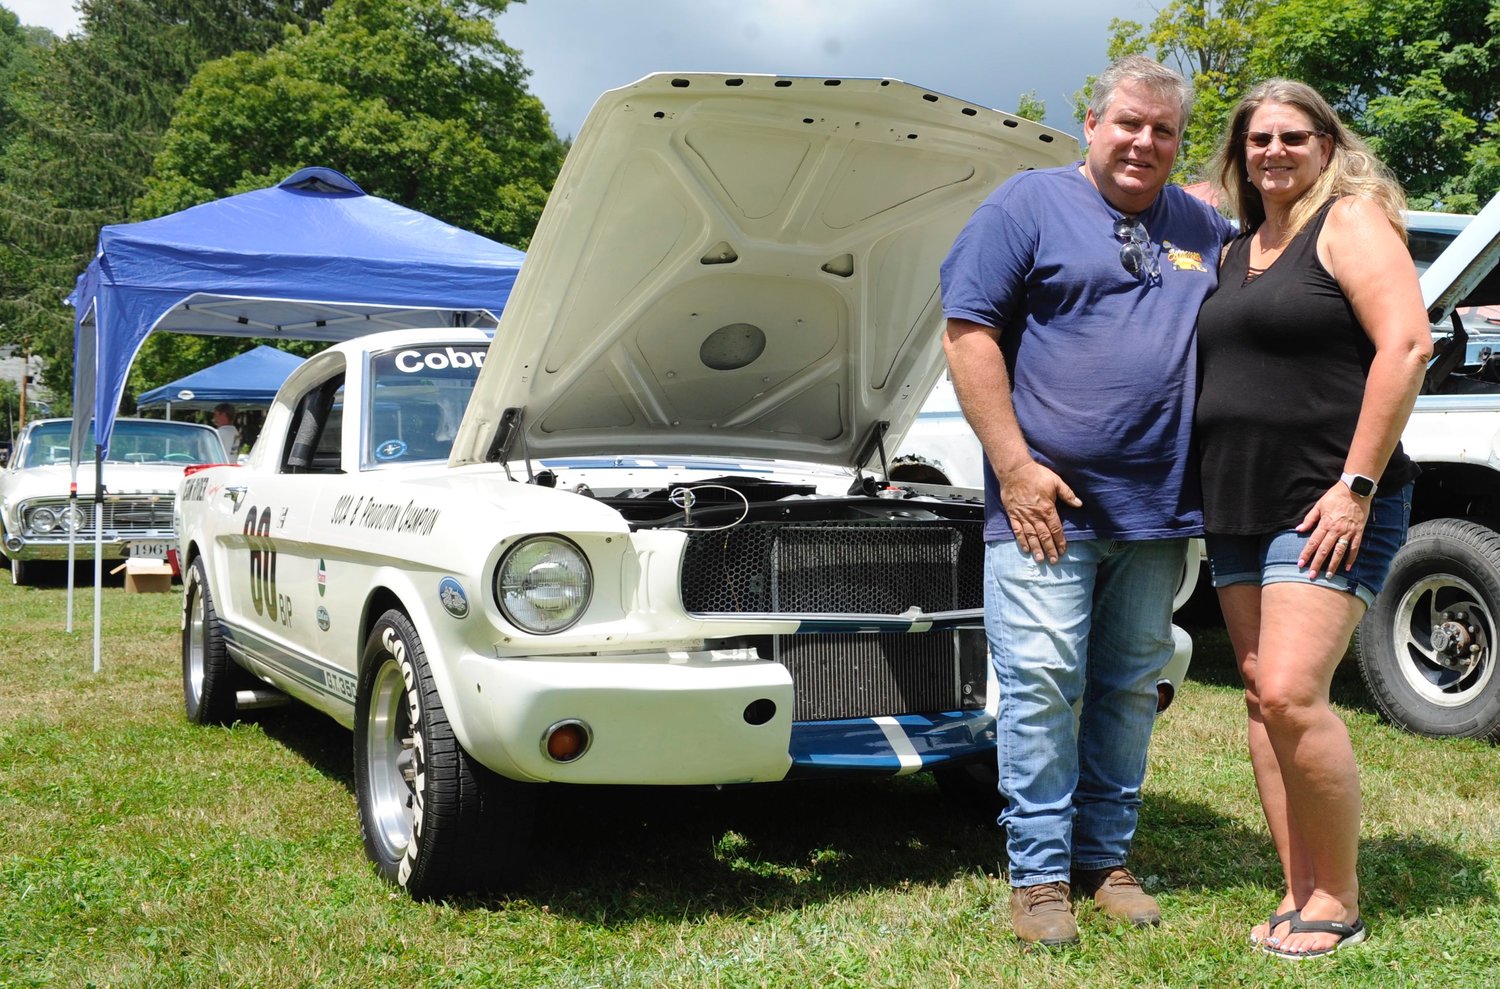 Tribute times two. Paul and Denise Ryder’s 1965 Shelby GT350R was built as a tribute to the late Carroll Shelby, creator of the legendary Ford Cobras and Ford GT 350 & 500 race cars, and to Paul’s late father.